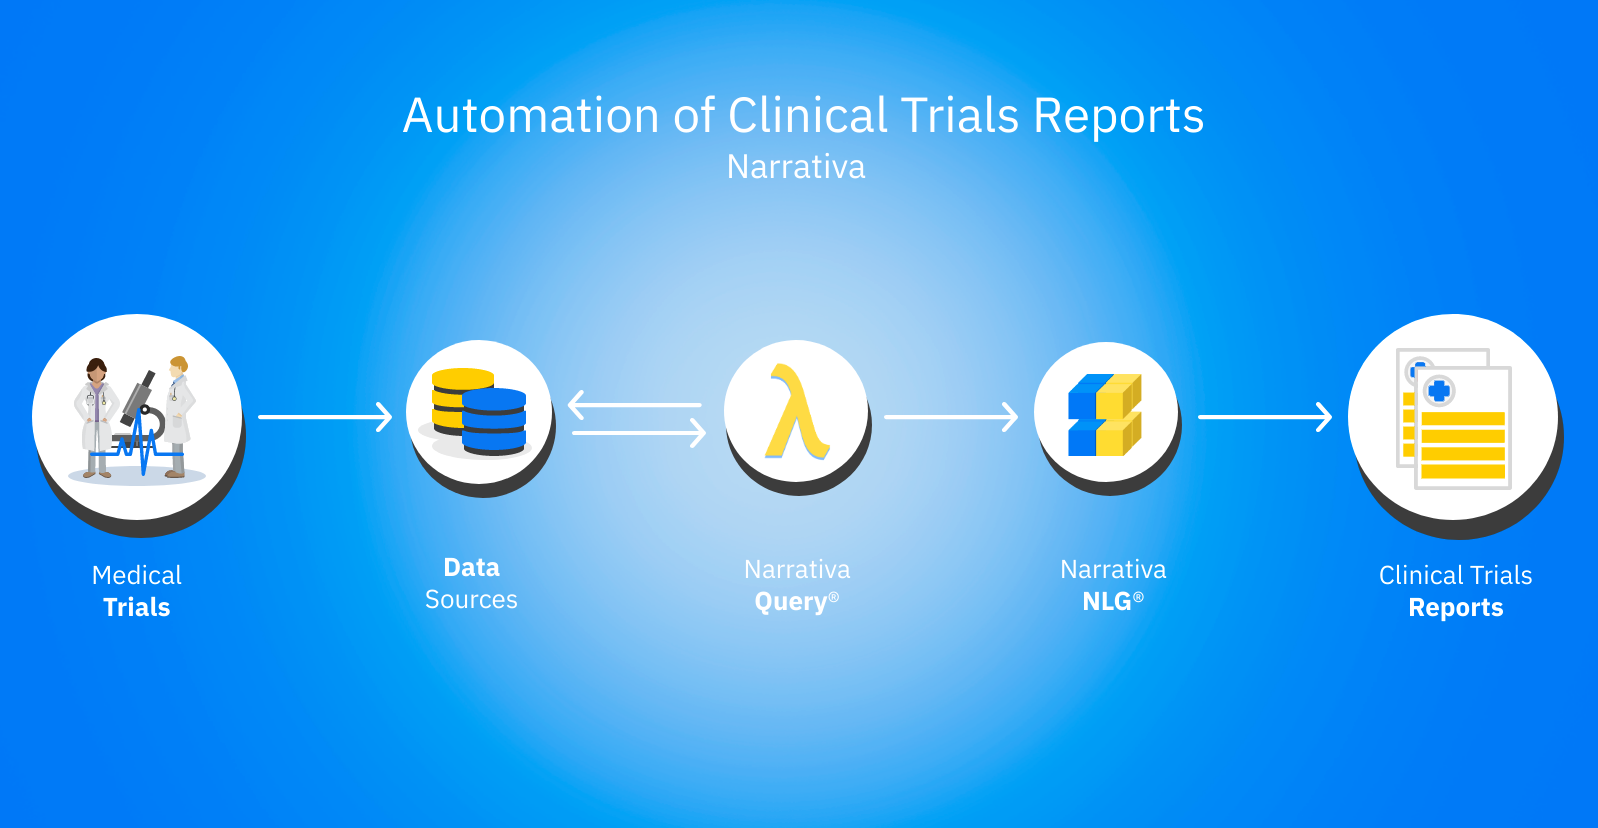 Automation of Clinical Trials Reports